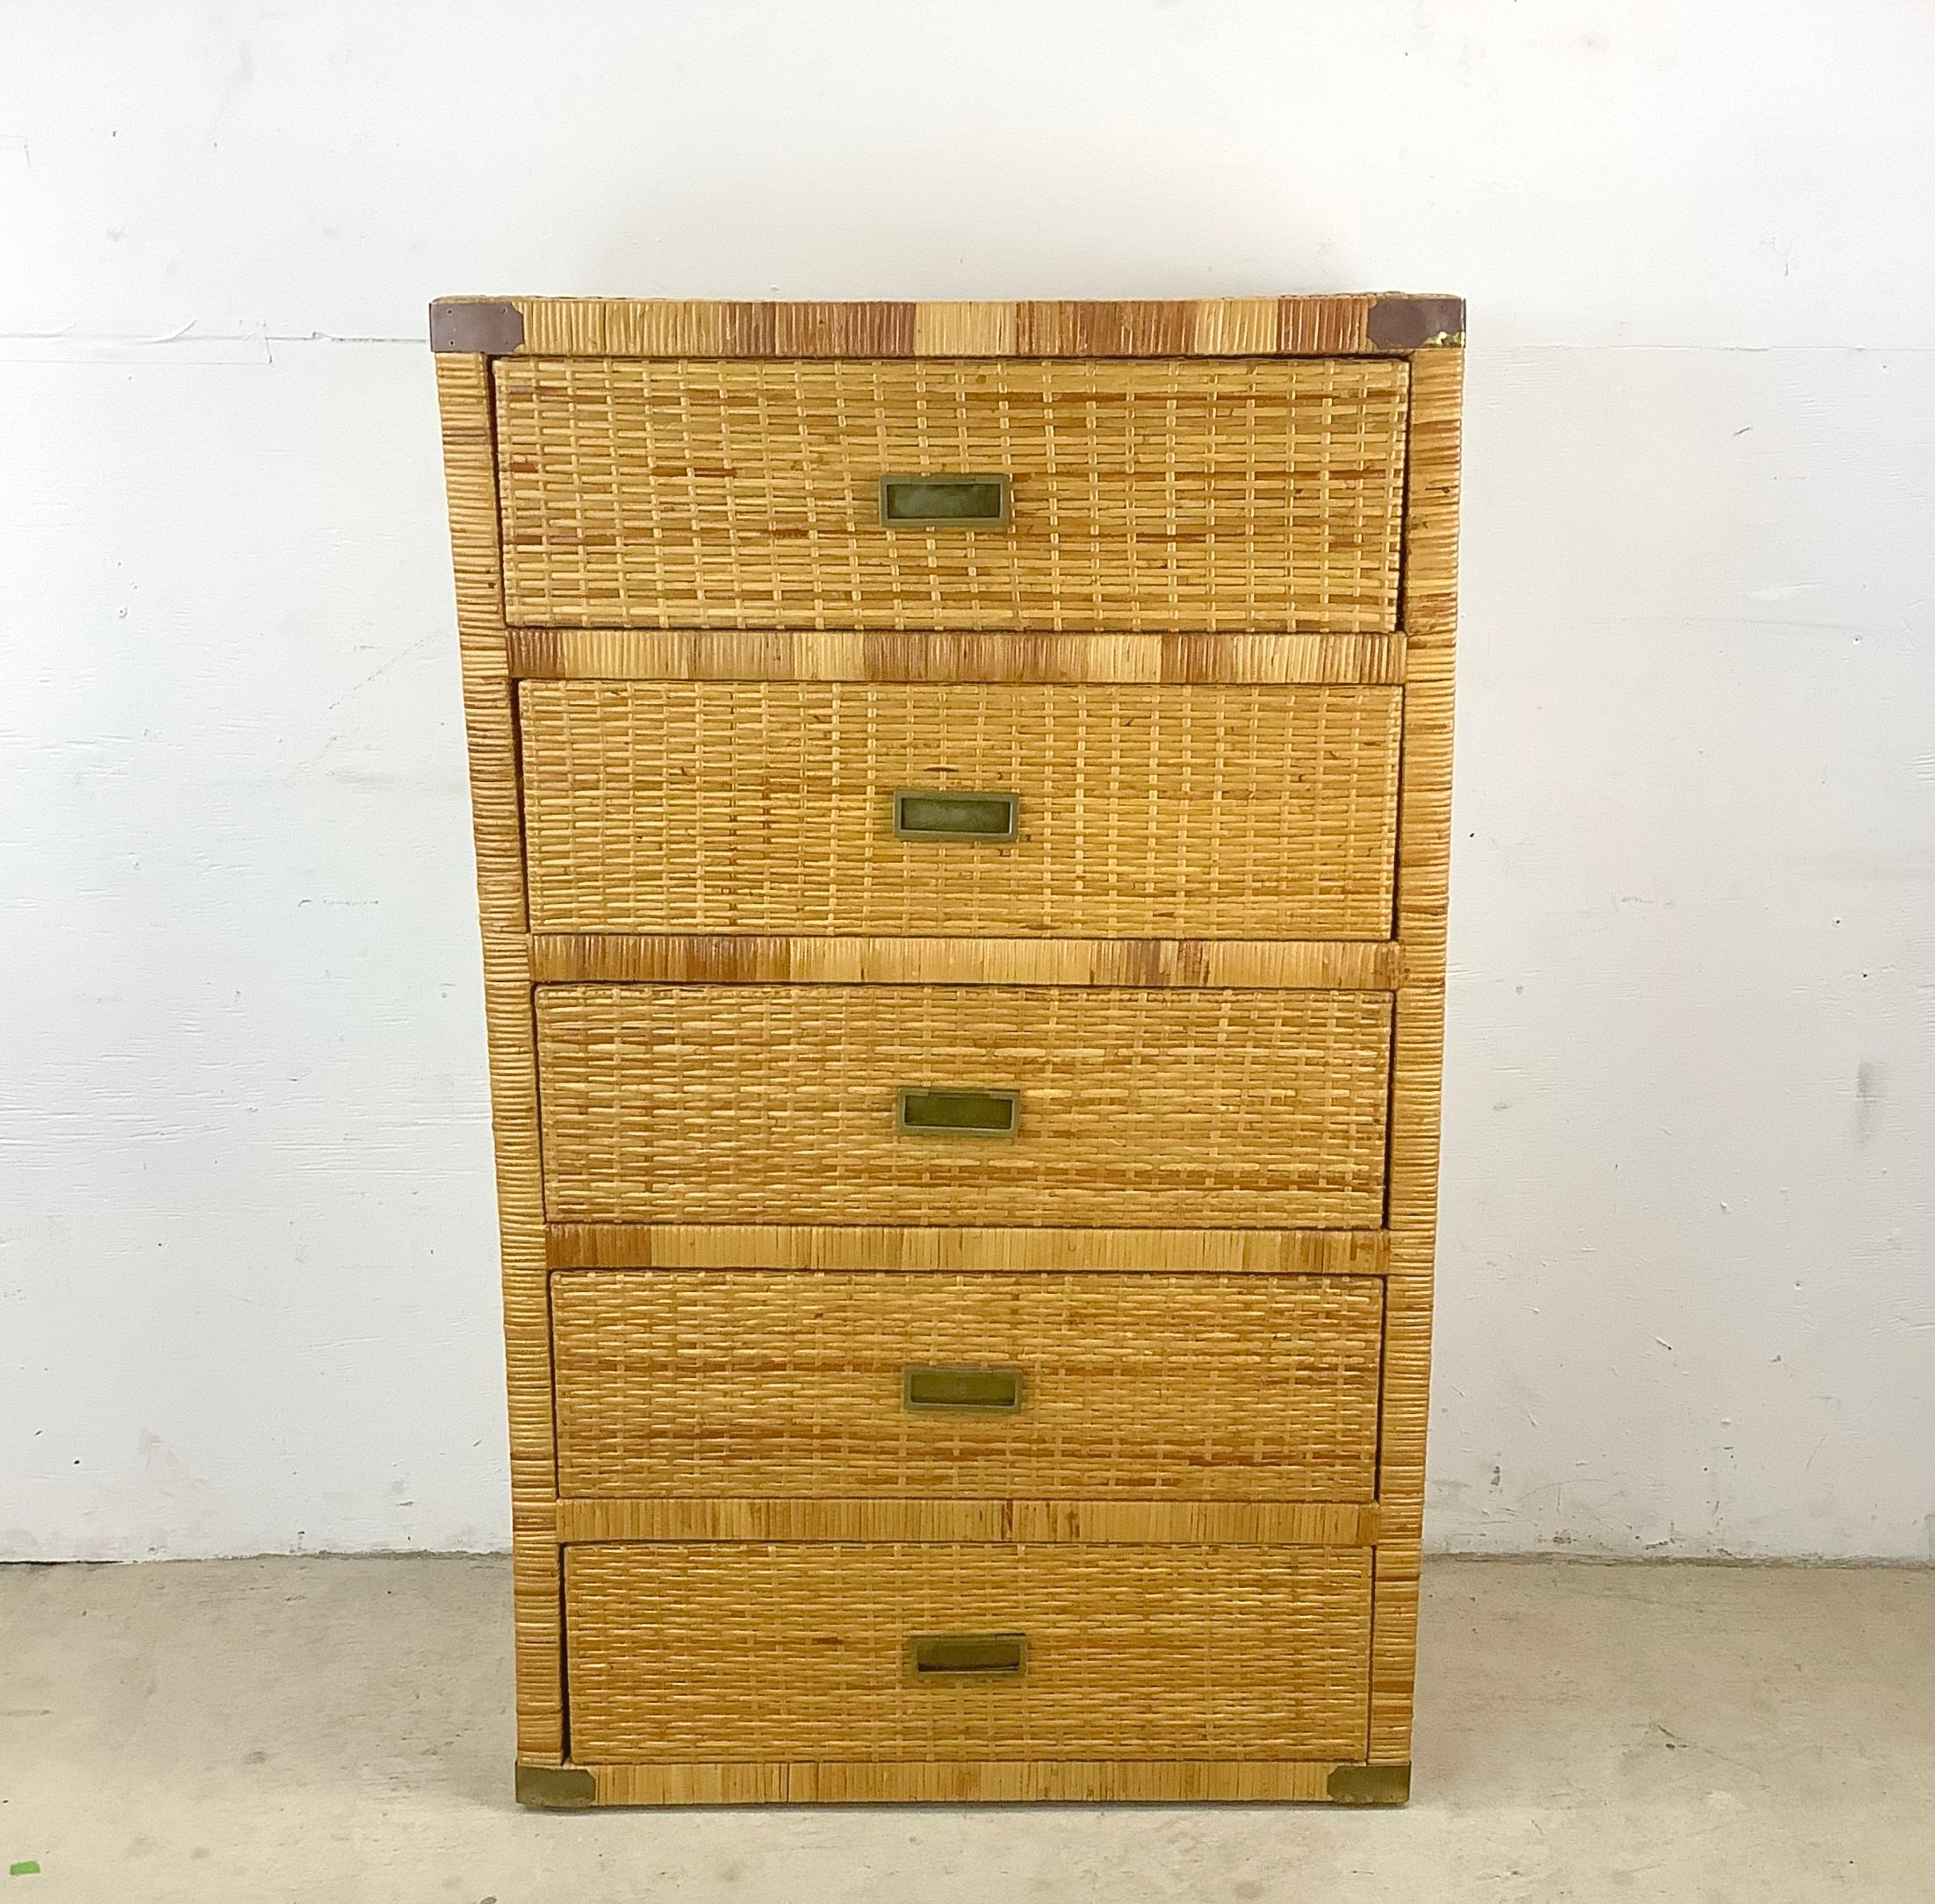 Introducing this Vintage Wicker Campaign Style Coastal Highboy – a delightful fusion of natural charm and timeless elegance that adds a touch of character to any space. Crafted with sturdy wicker and wood materials, this Bielecky Brothers style